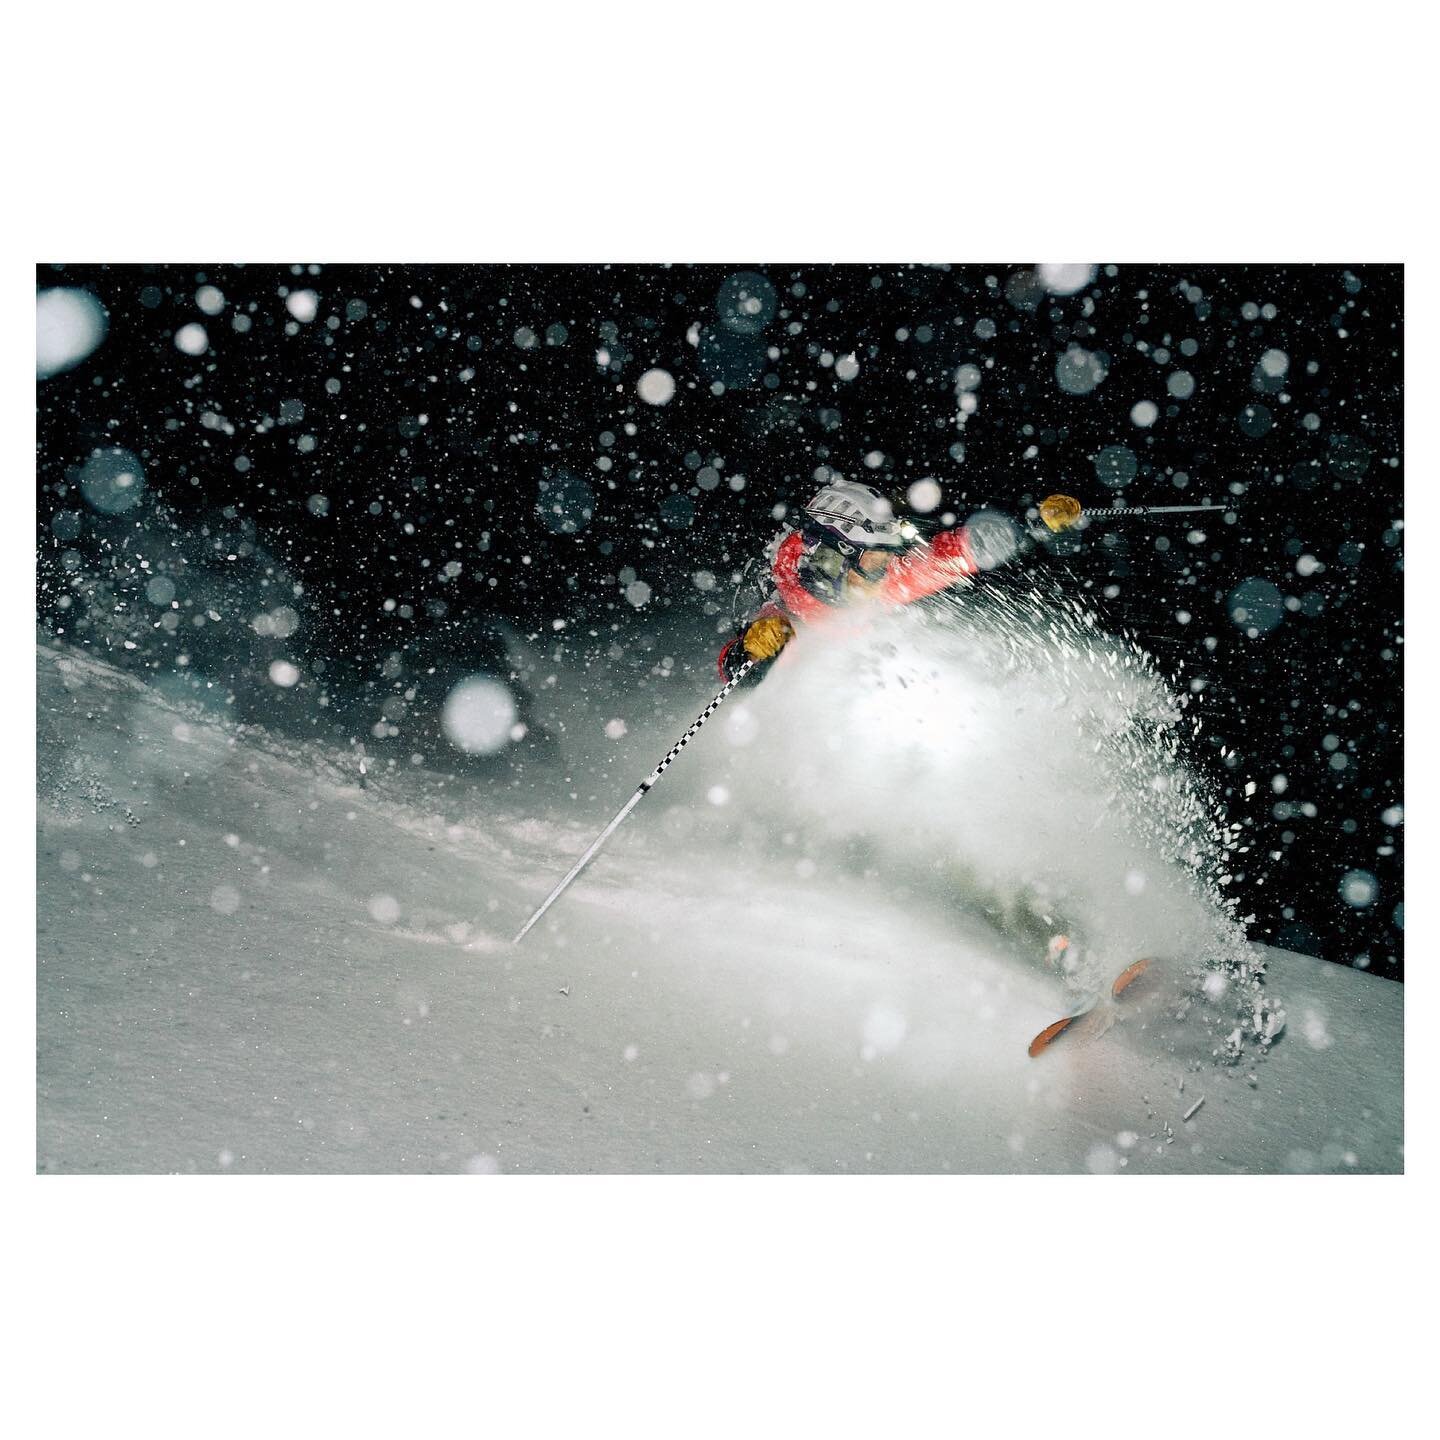 Rob Heule in the middle of the night and into the pages of Mountain Life Media Rocky Mountains :) 
We went up hunting for moonlight and scored Mid-May (yes, MAY) pow turns. There&rsquo;s so much more fun stuff to share from this project soon! 
Thanks